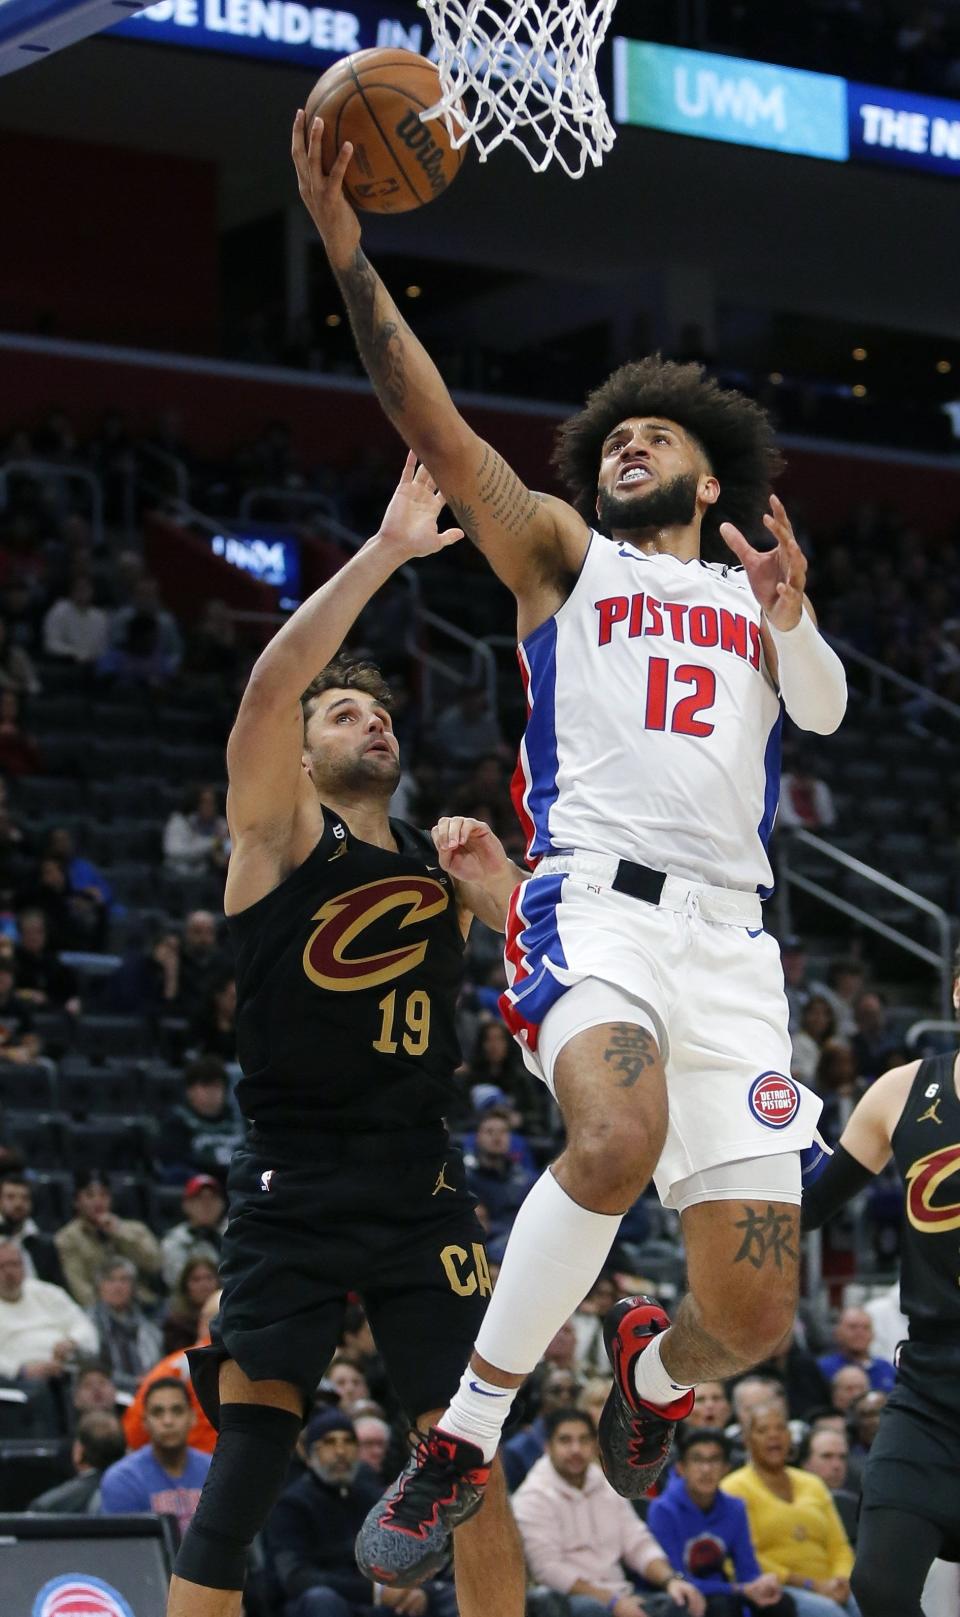 Detroit Pistons forward Isaiah Livers (12) goes to the basket against Cleveland Cavaliers guard Raul Neto (19) during the first half at Little Caesars Arena in Detroit on Sunday, Nov. 27, 2022.